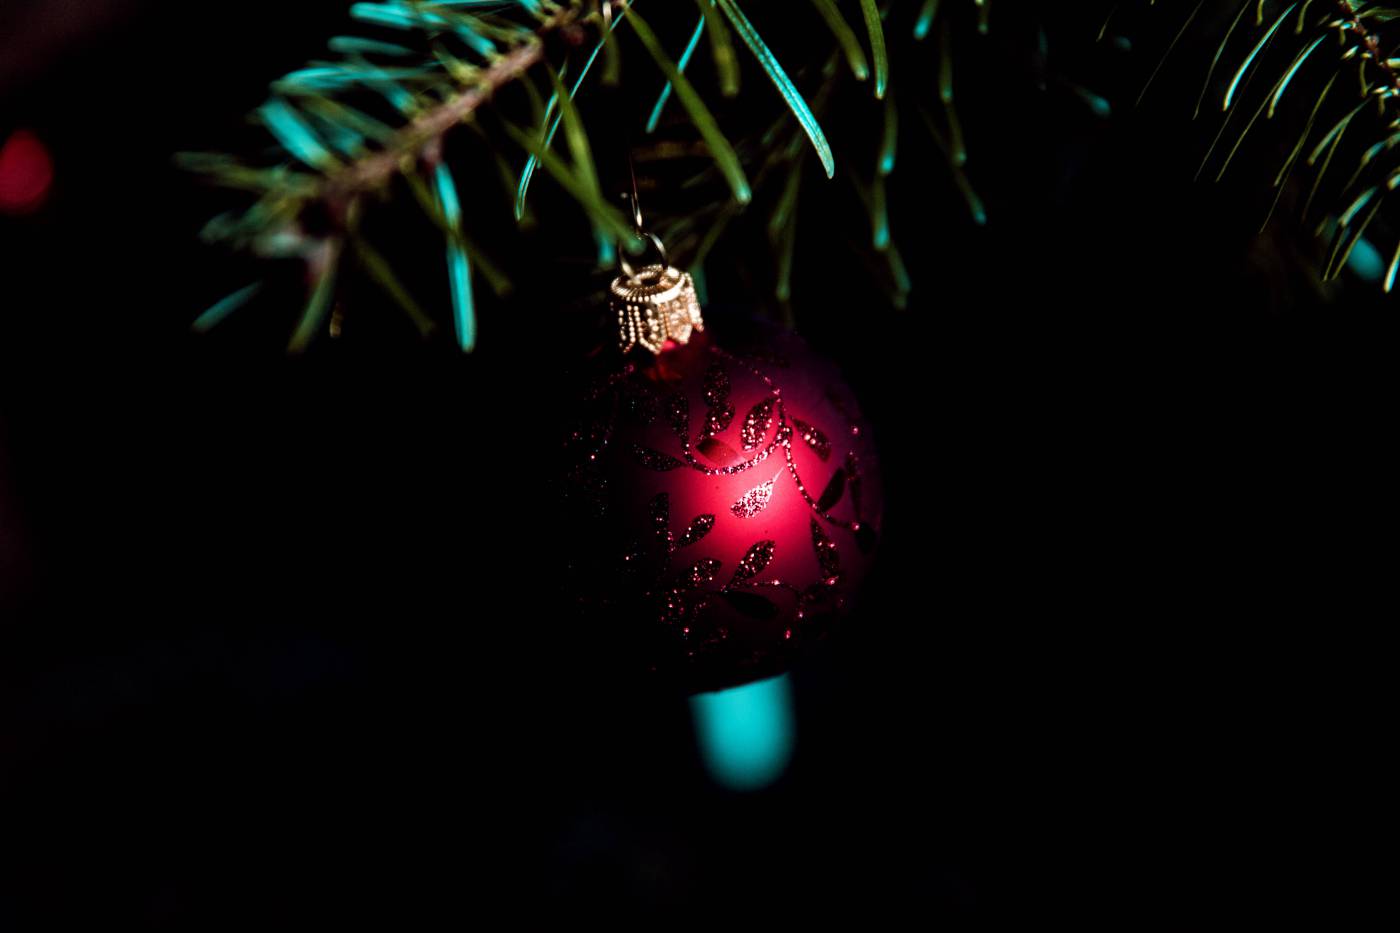 christmasy ball fir tree/ picture